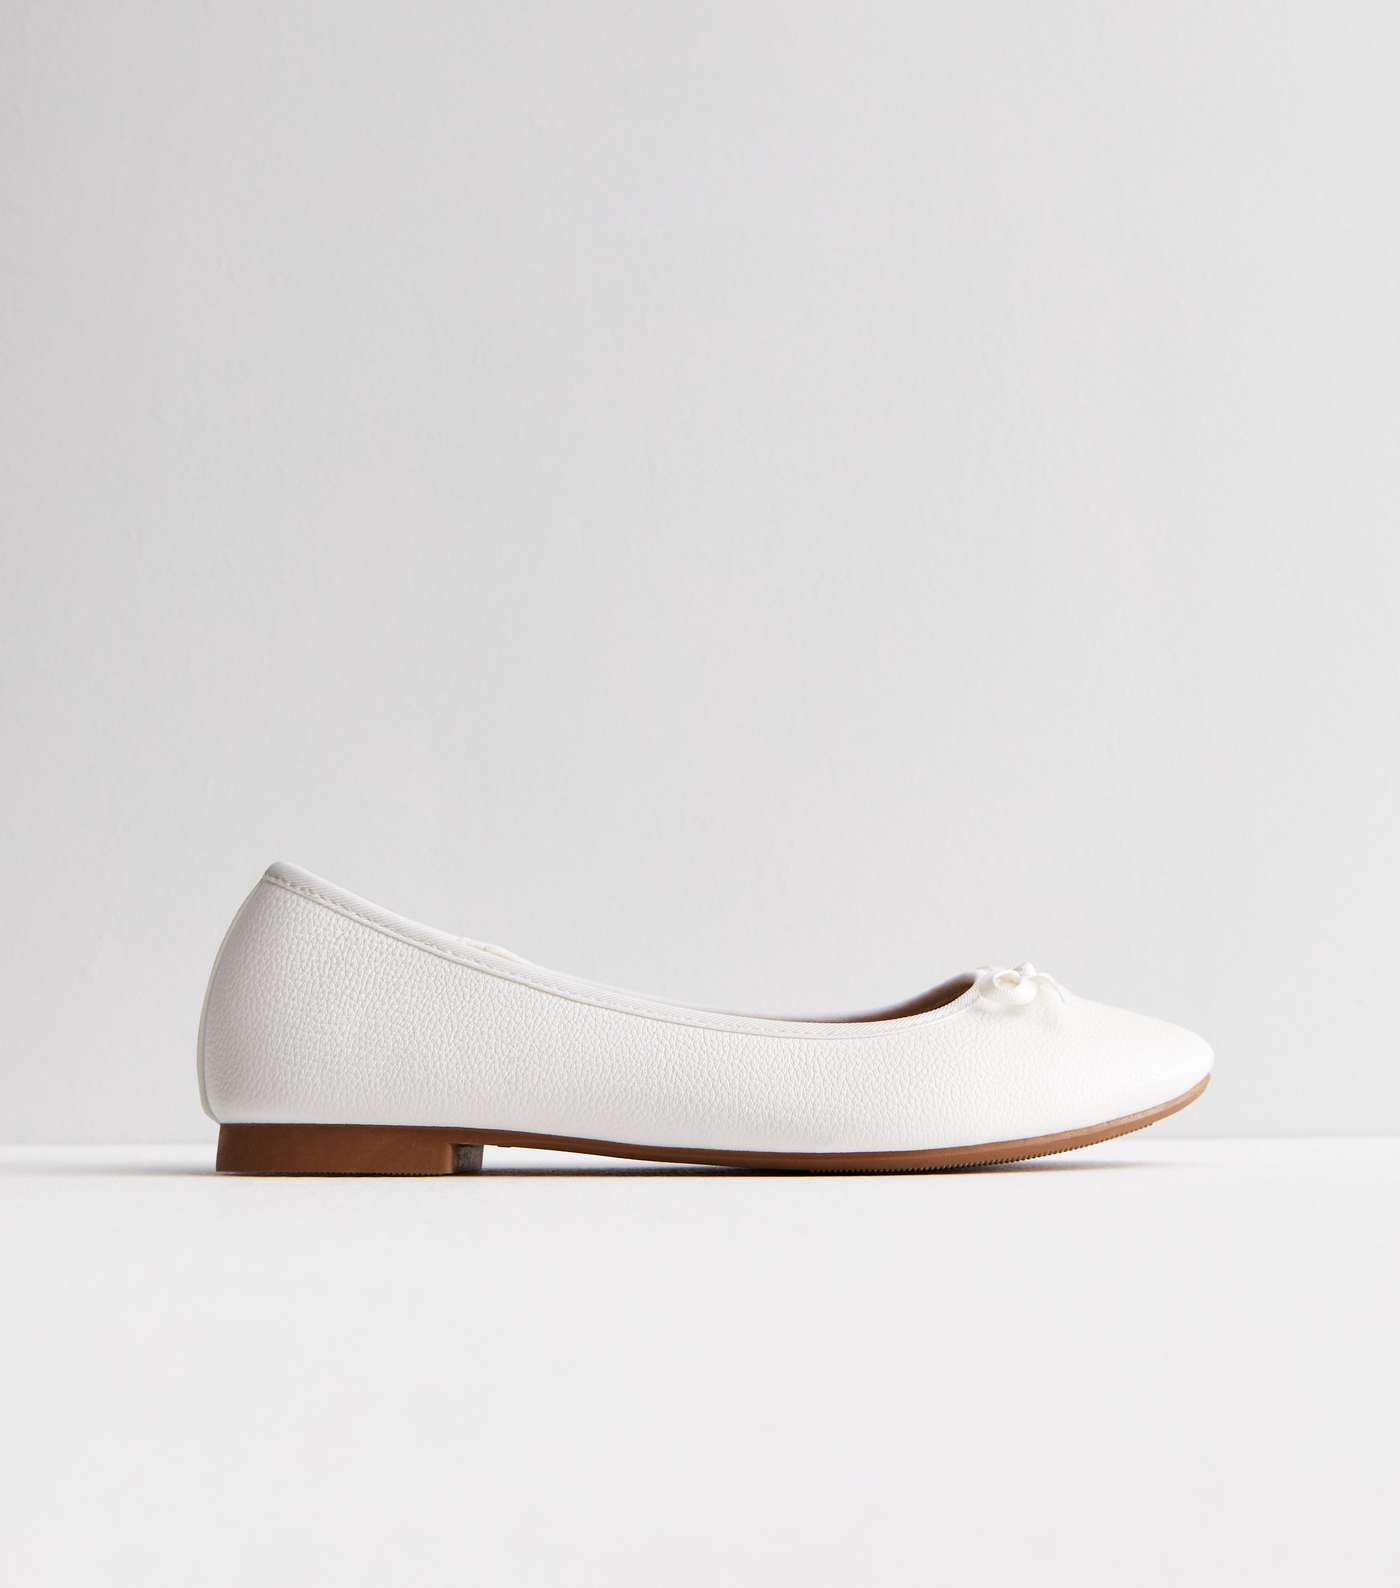 Wide Fit White Leather-Look Ballerina Pumps Image 3